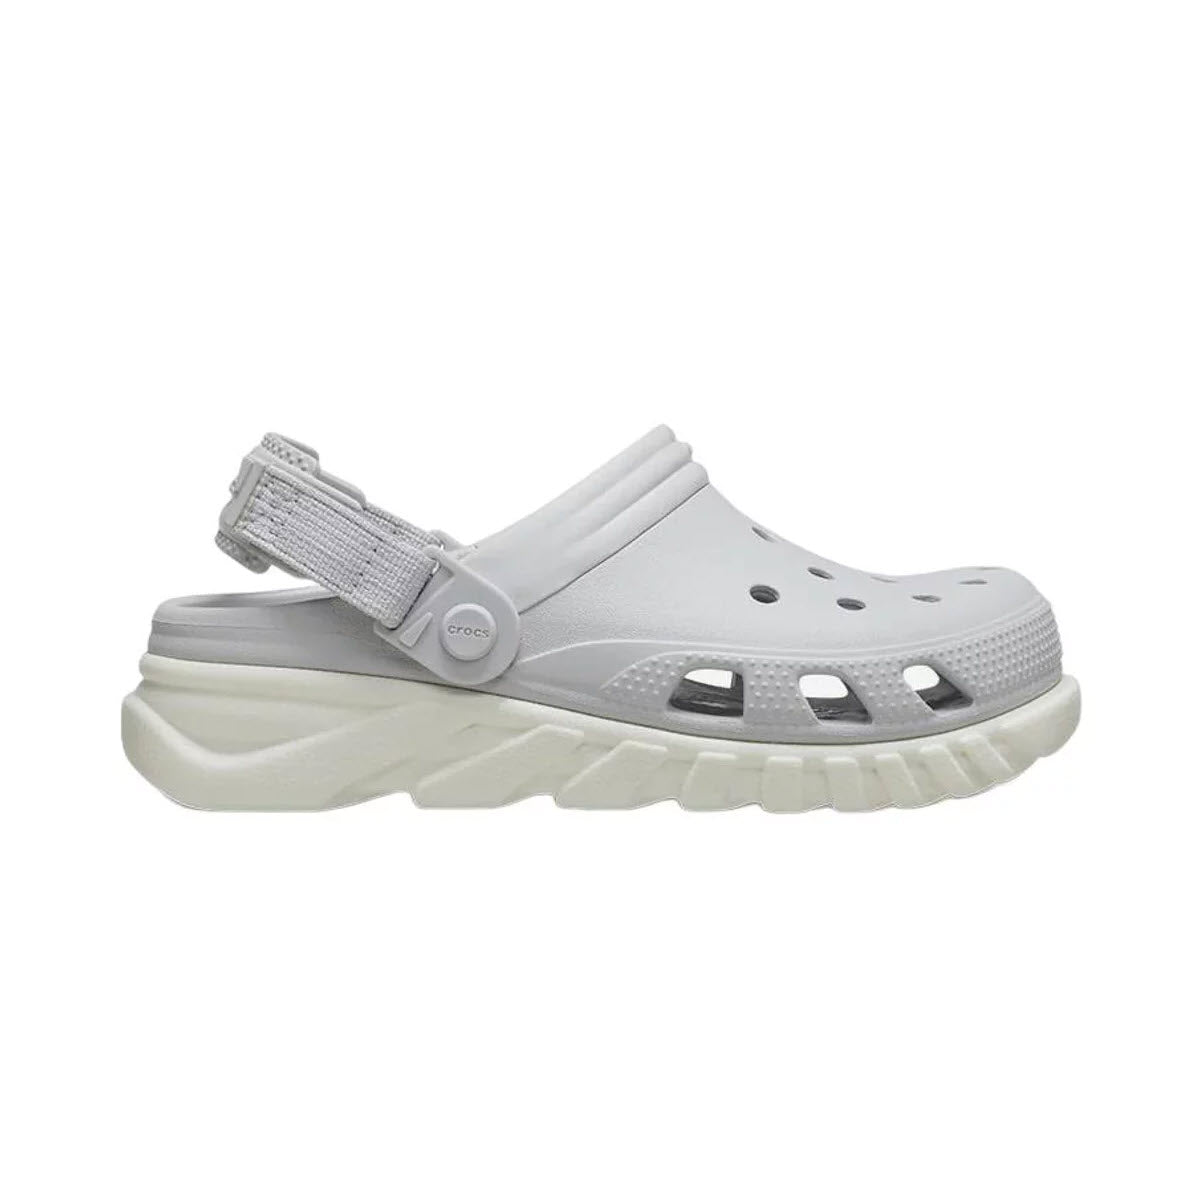 Crocs Duet Max II slip-resistant clog sandal with adjustable back straps and thick sole, isolated on a white background.